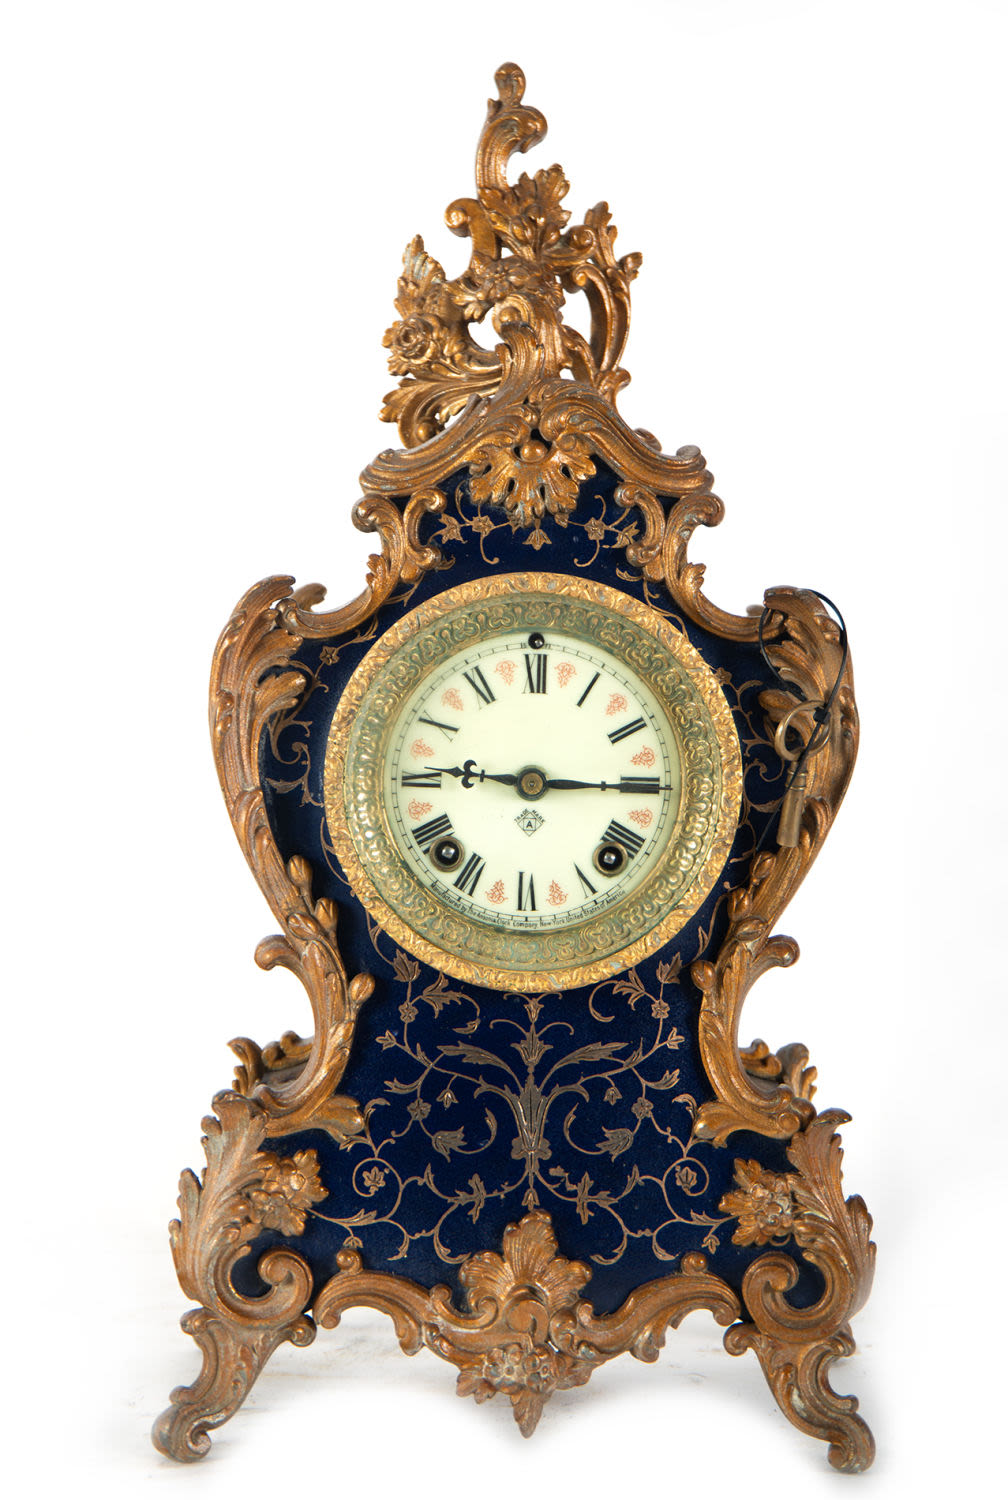 Louis XV style clock in gilt bronze and enamels, 19th century